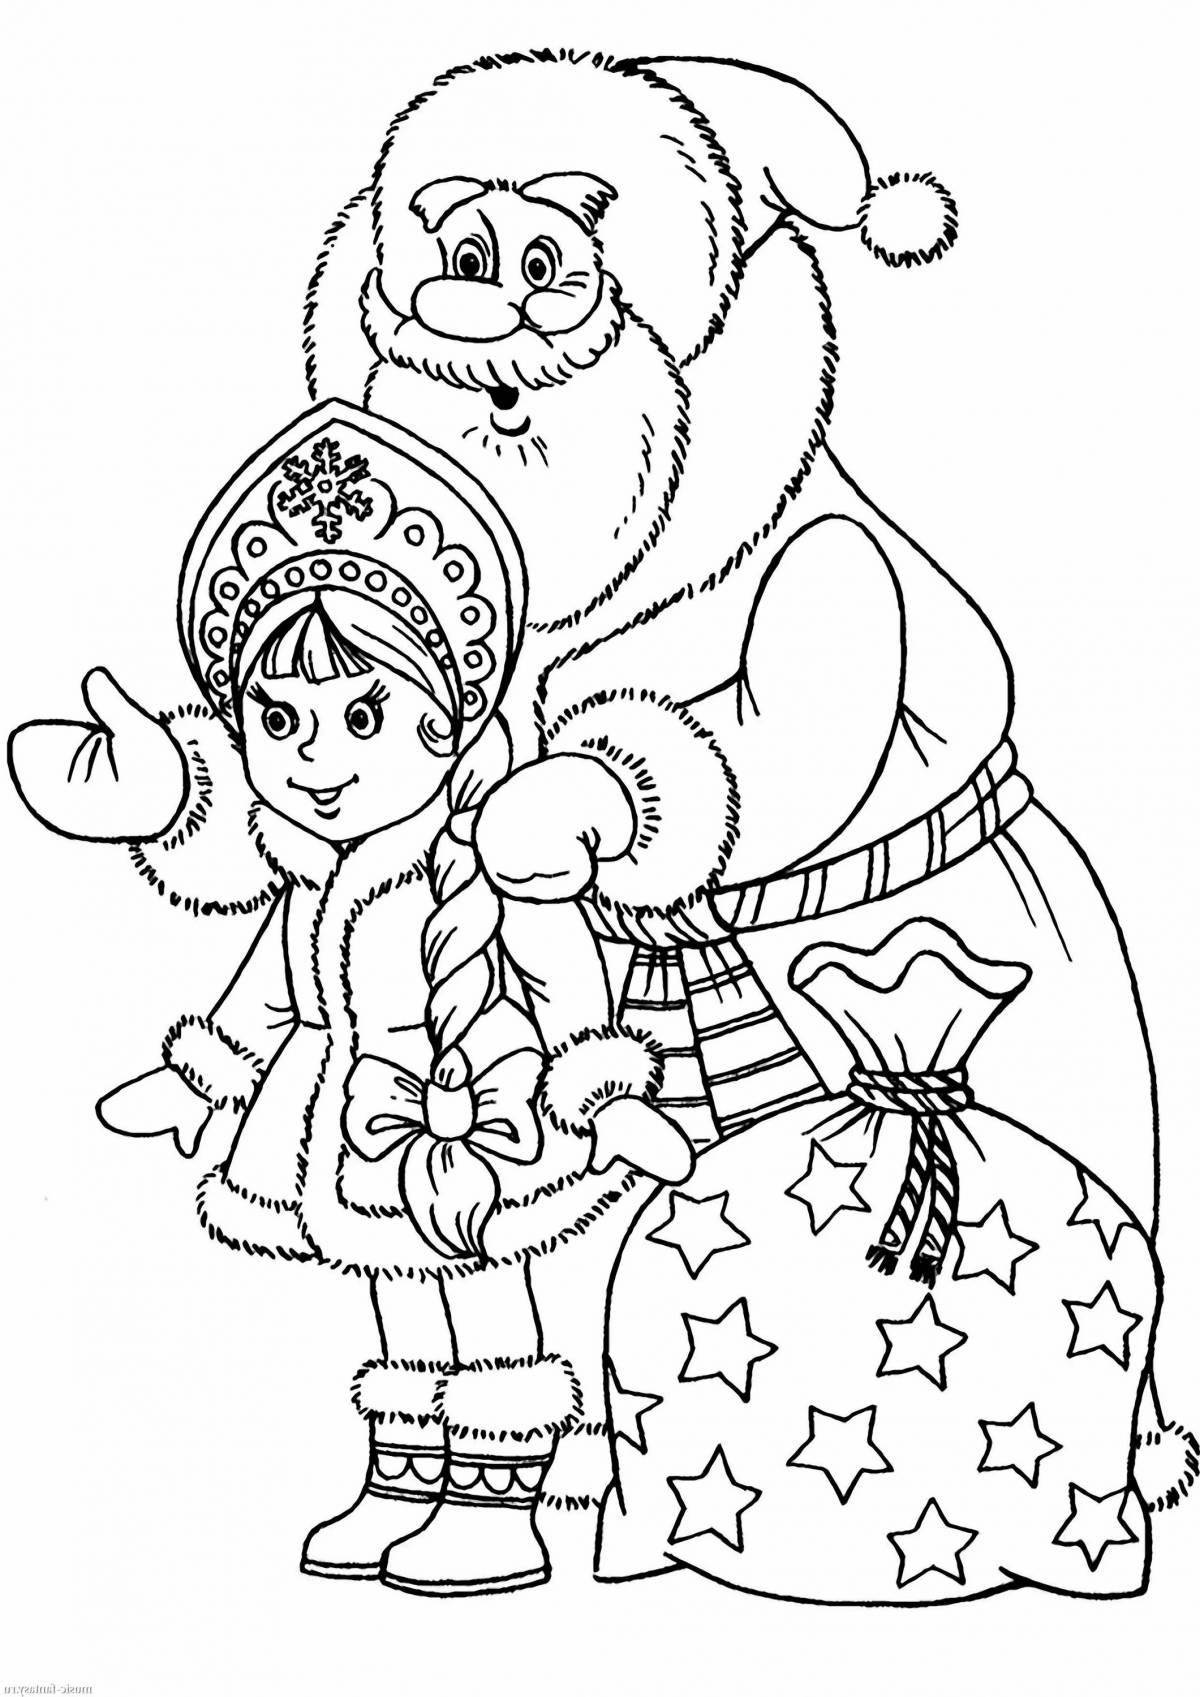 Coloring book glowing Christmas Snow Maiden